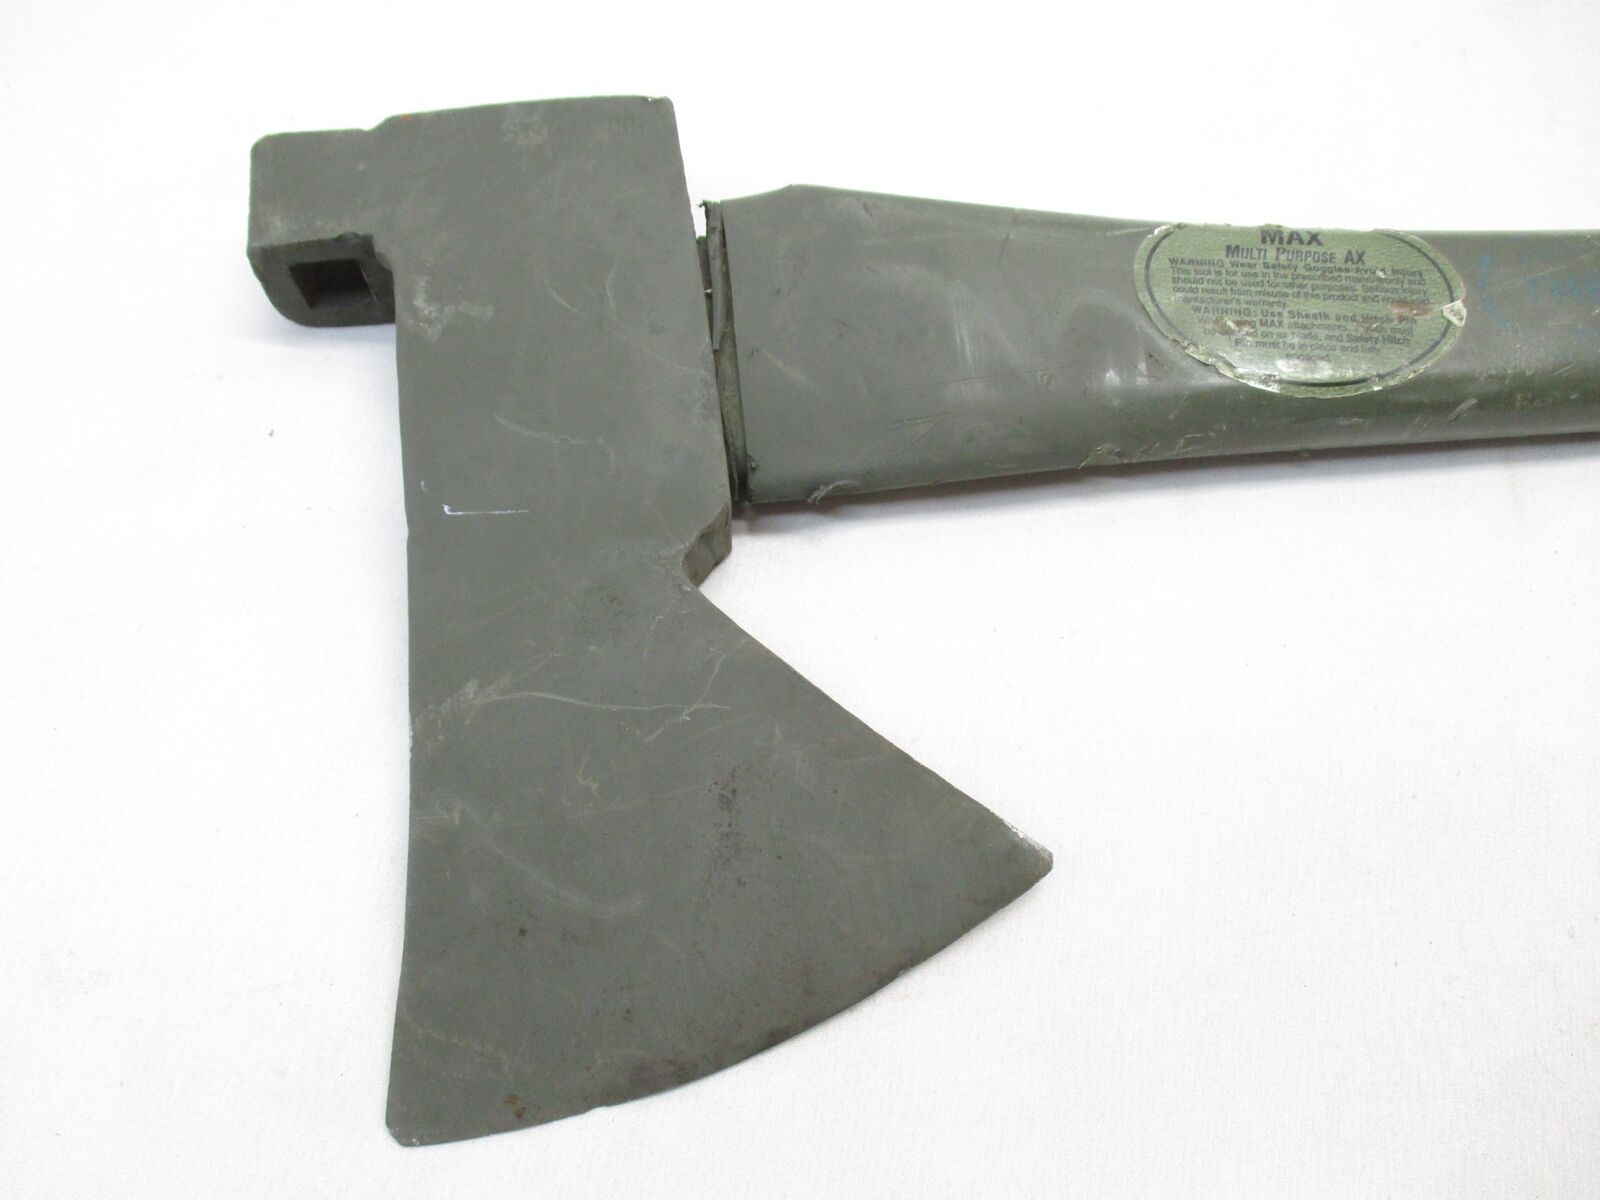 MILITARY PIONEER TOOL FULL SIZE AXE THE MAX COMBINATION FORESTRY TOOL OD GREEN